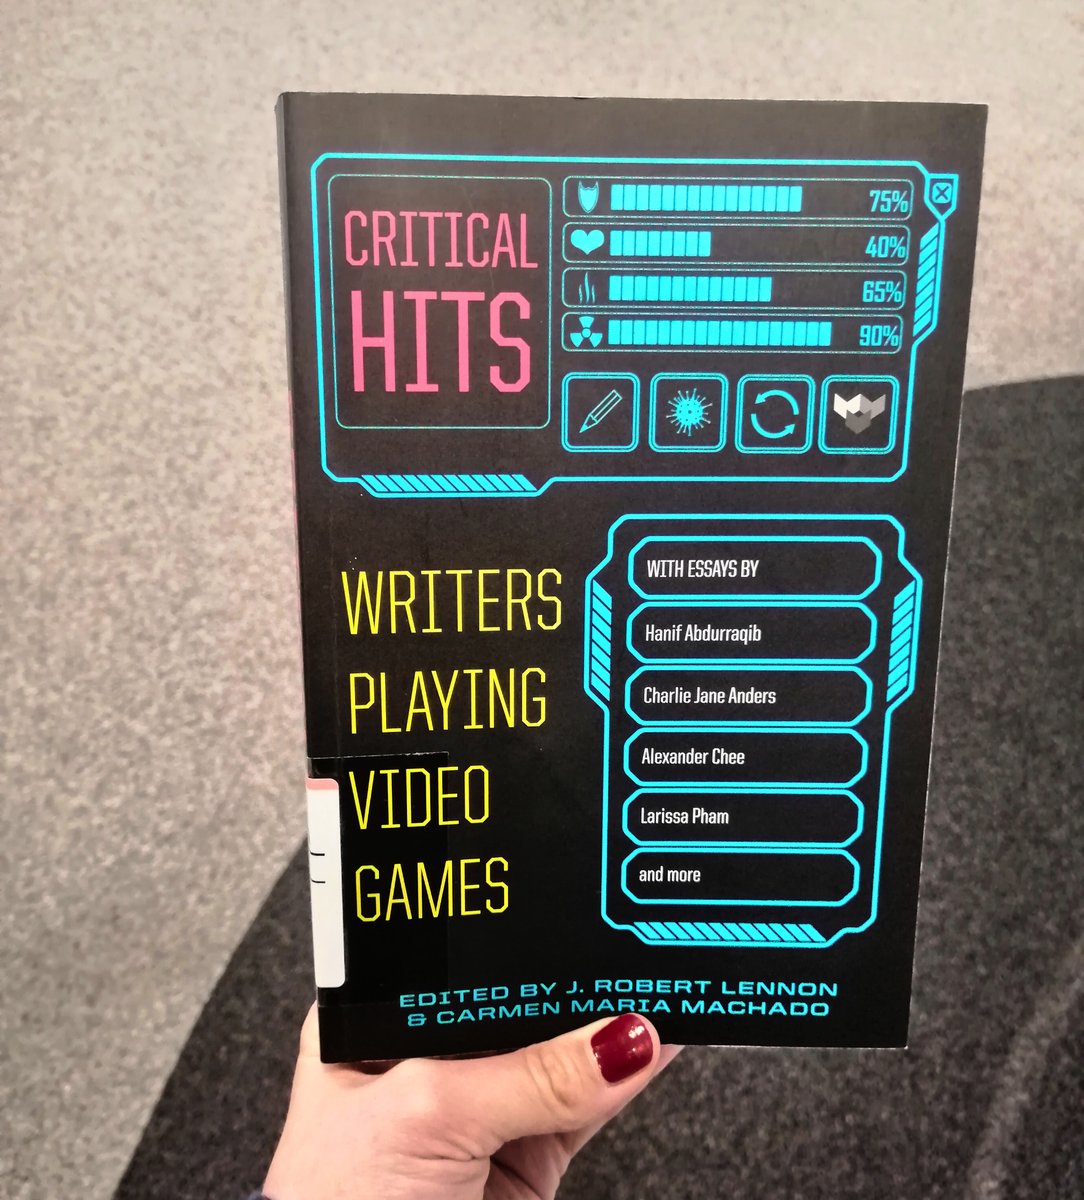 Critical Hits, an anthology edited by J Robert Lennon & #CarmenMariaMachado featuring 18 essays & 1 comic by writer-gamers about their relationships with #videogames. hf!
🎮
lvl up here: opac.sub.uni-goettingen.de/DB=1/XMLPRS=N/…

#AmericanLiterature #GamesStudies #LiteraryStudies #CulturalStudies